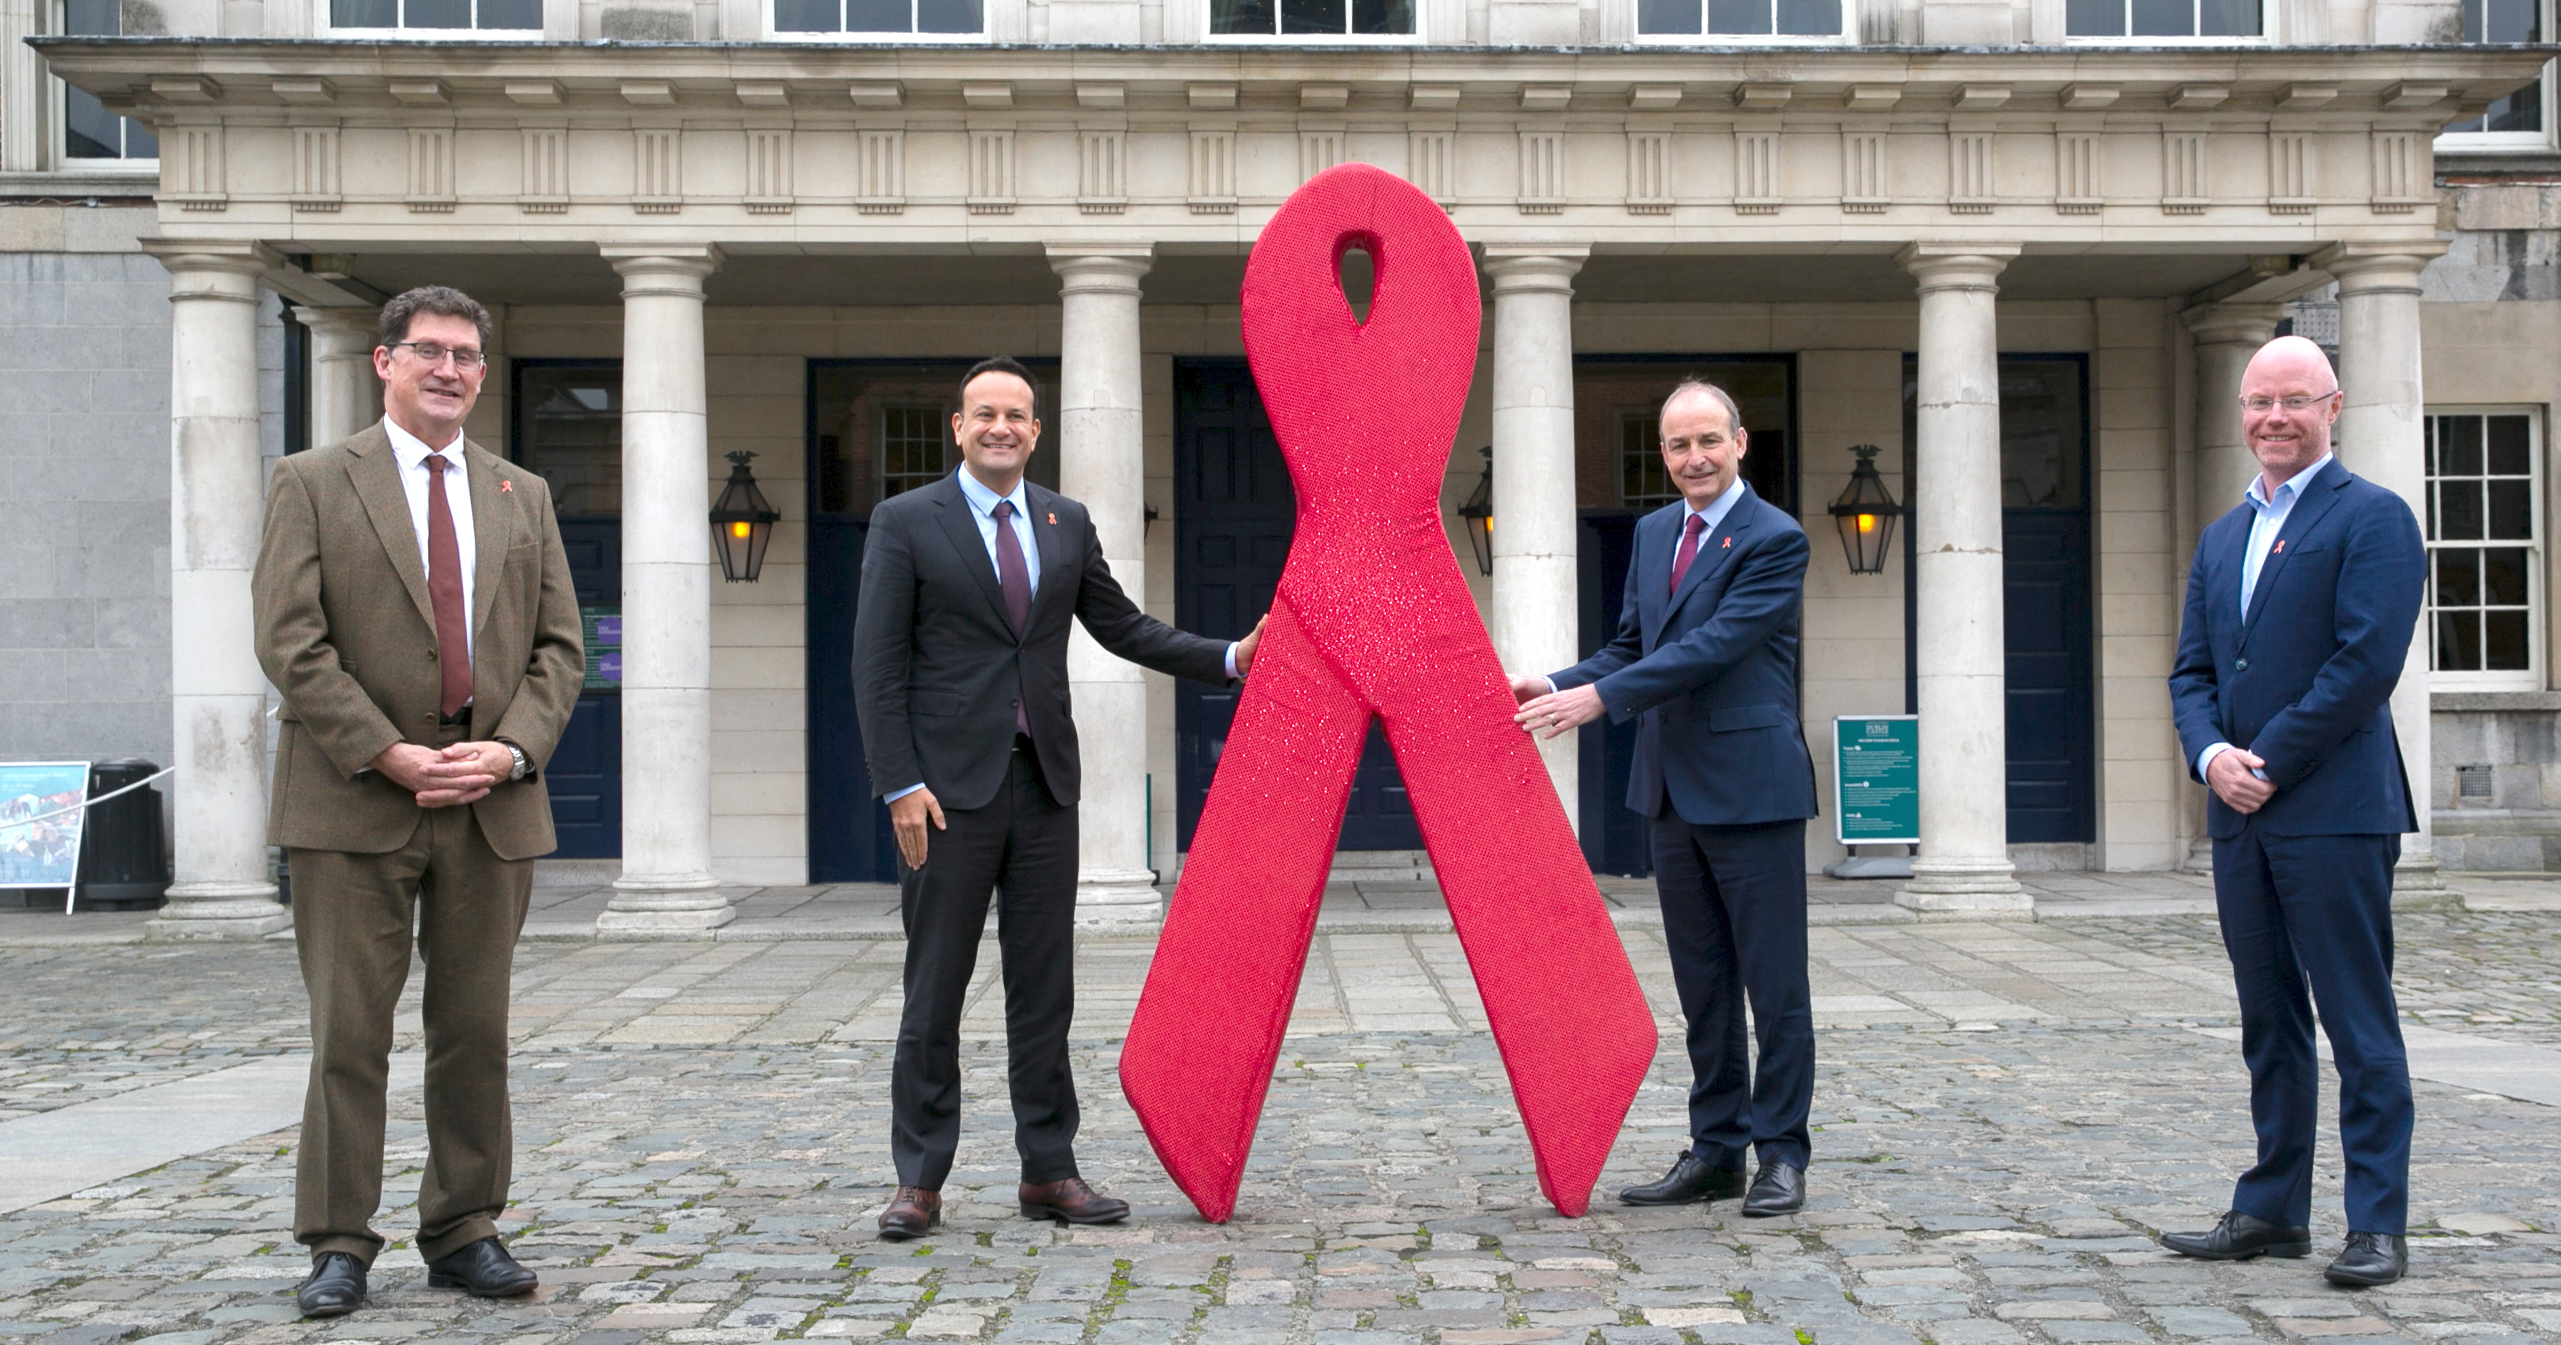 Government leaders pose with the red ribbon outside Dublin Castle for World AIDS Day 2021.